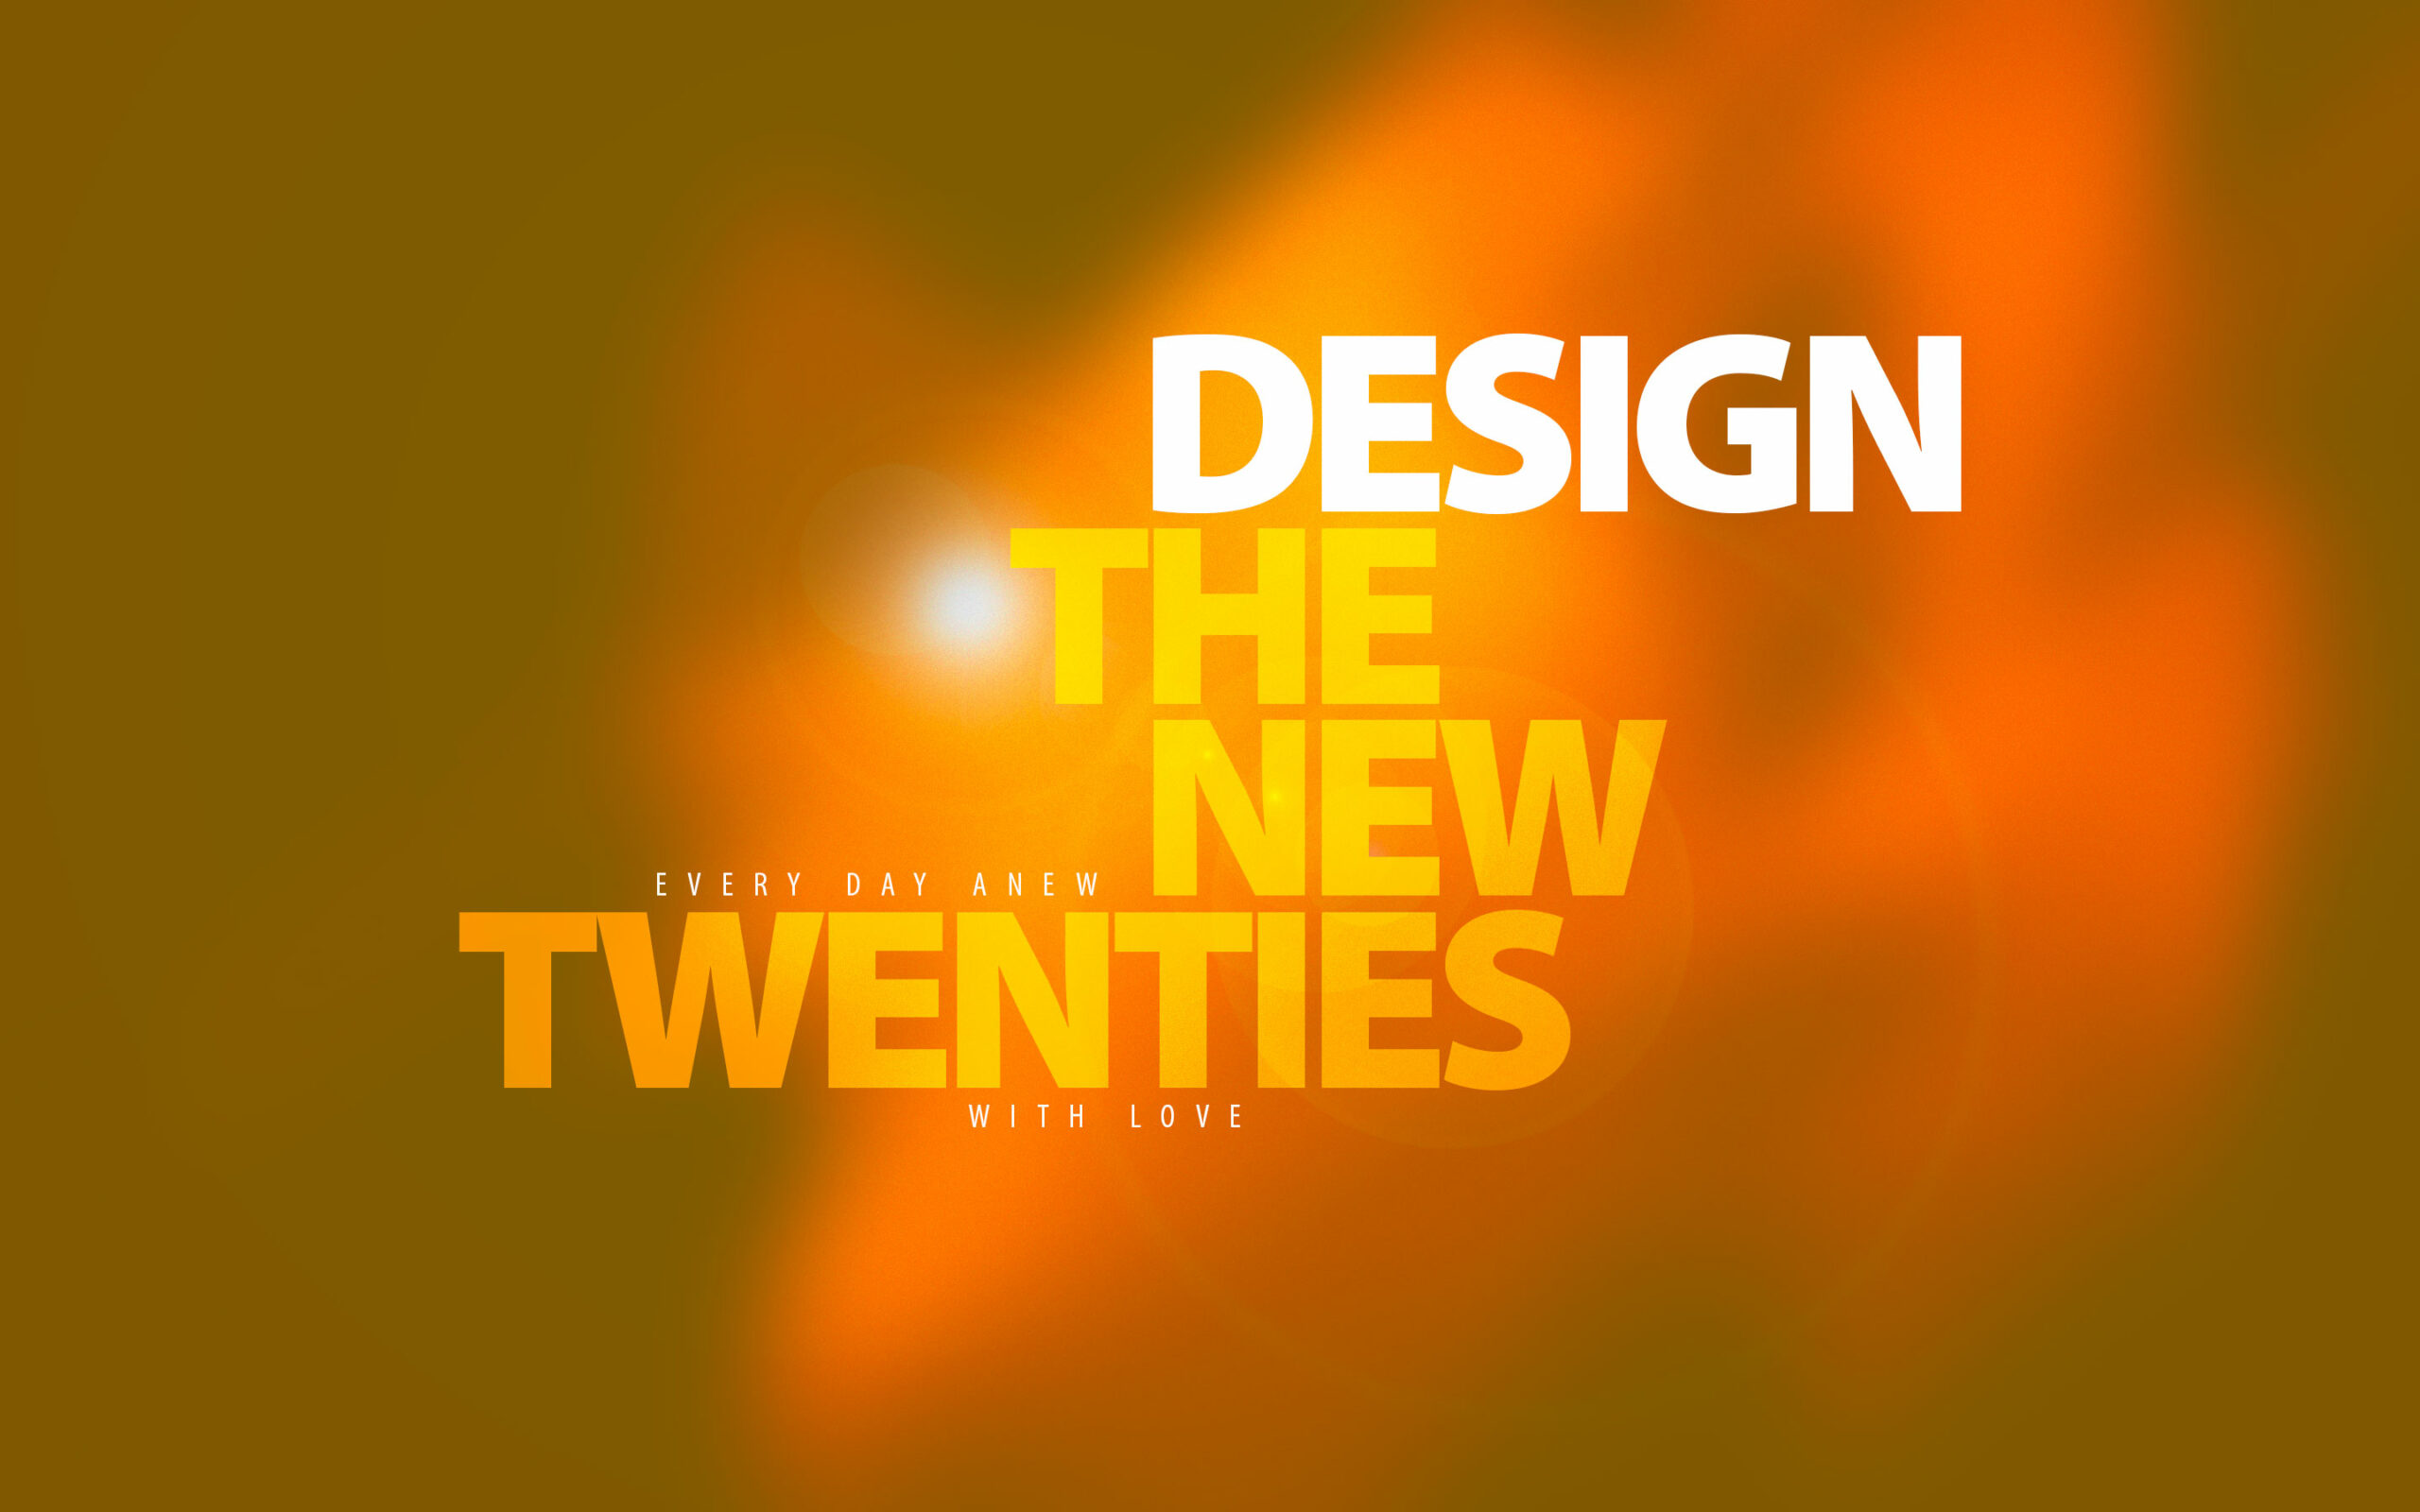 Design the New Twenties – Every day anew with Love (yellow)